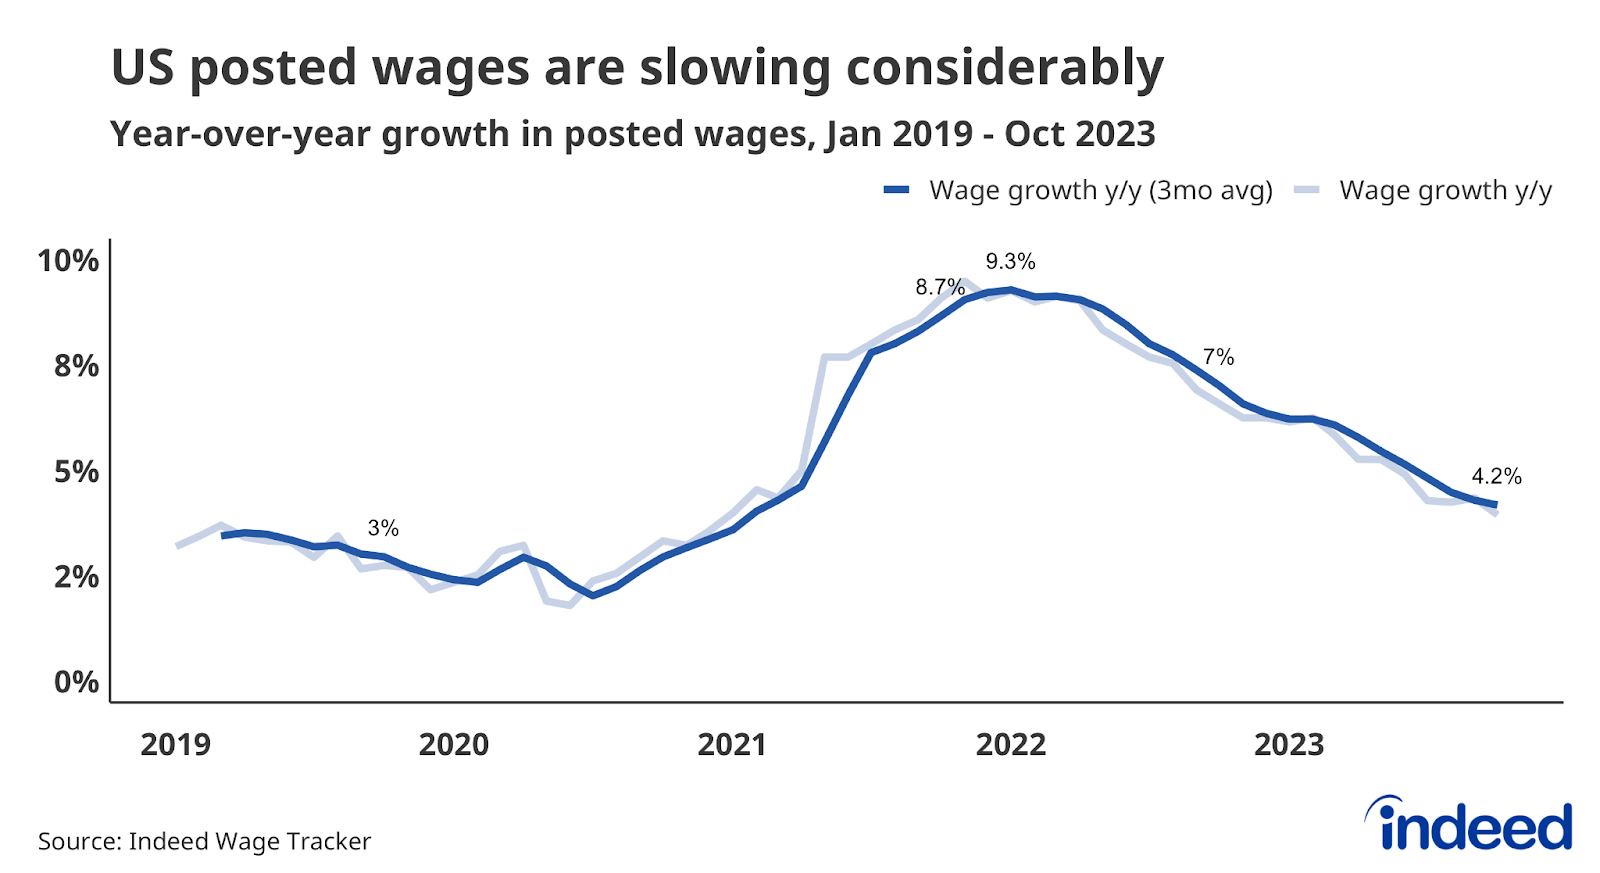 Line graph titled “US posted wages are slowing considerably” with a vertical axis from 0% to 10%. The graph covers from January 2019 to October 2023. It shows posted wage growth rising quickly through most of 2021 before peaking in January 2022 and declining through October 2023.